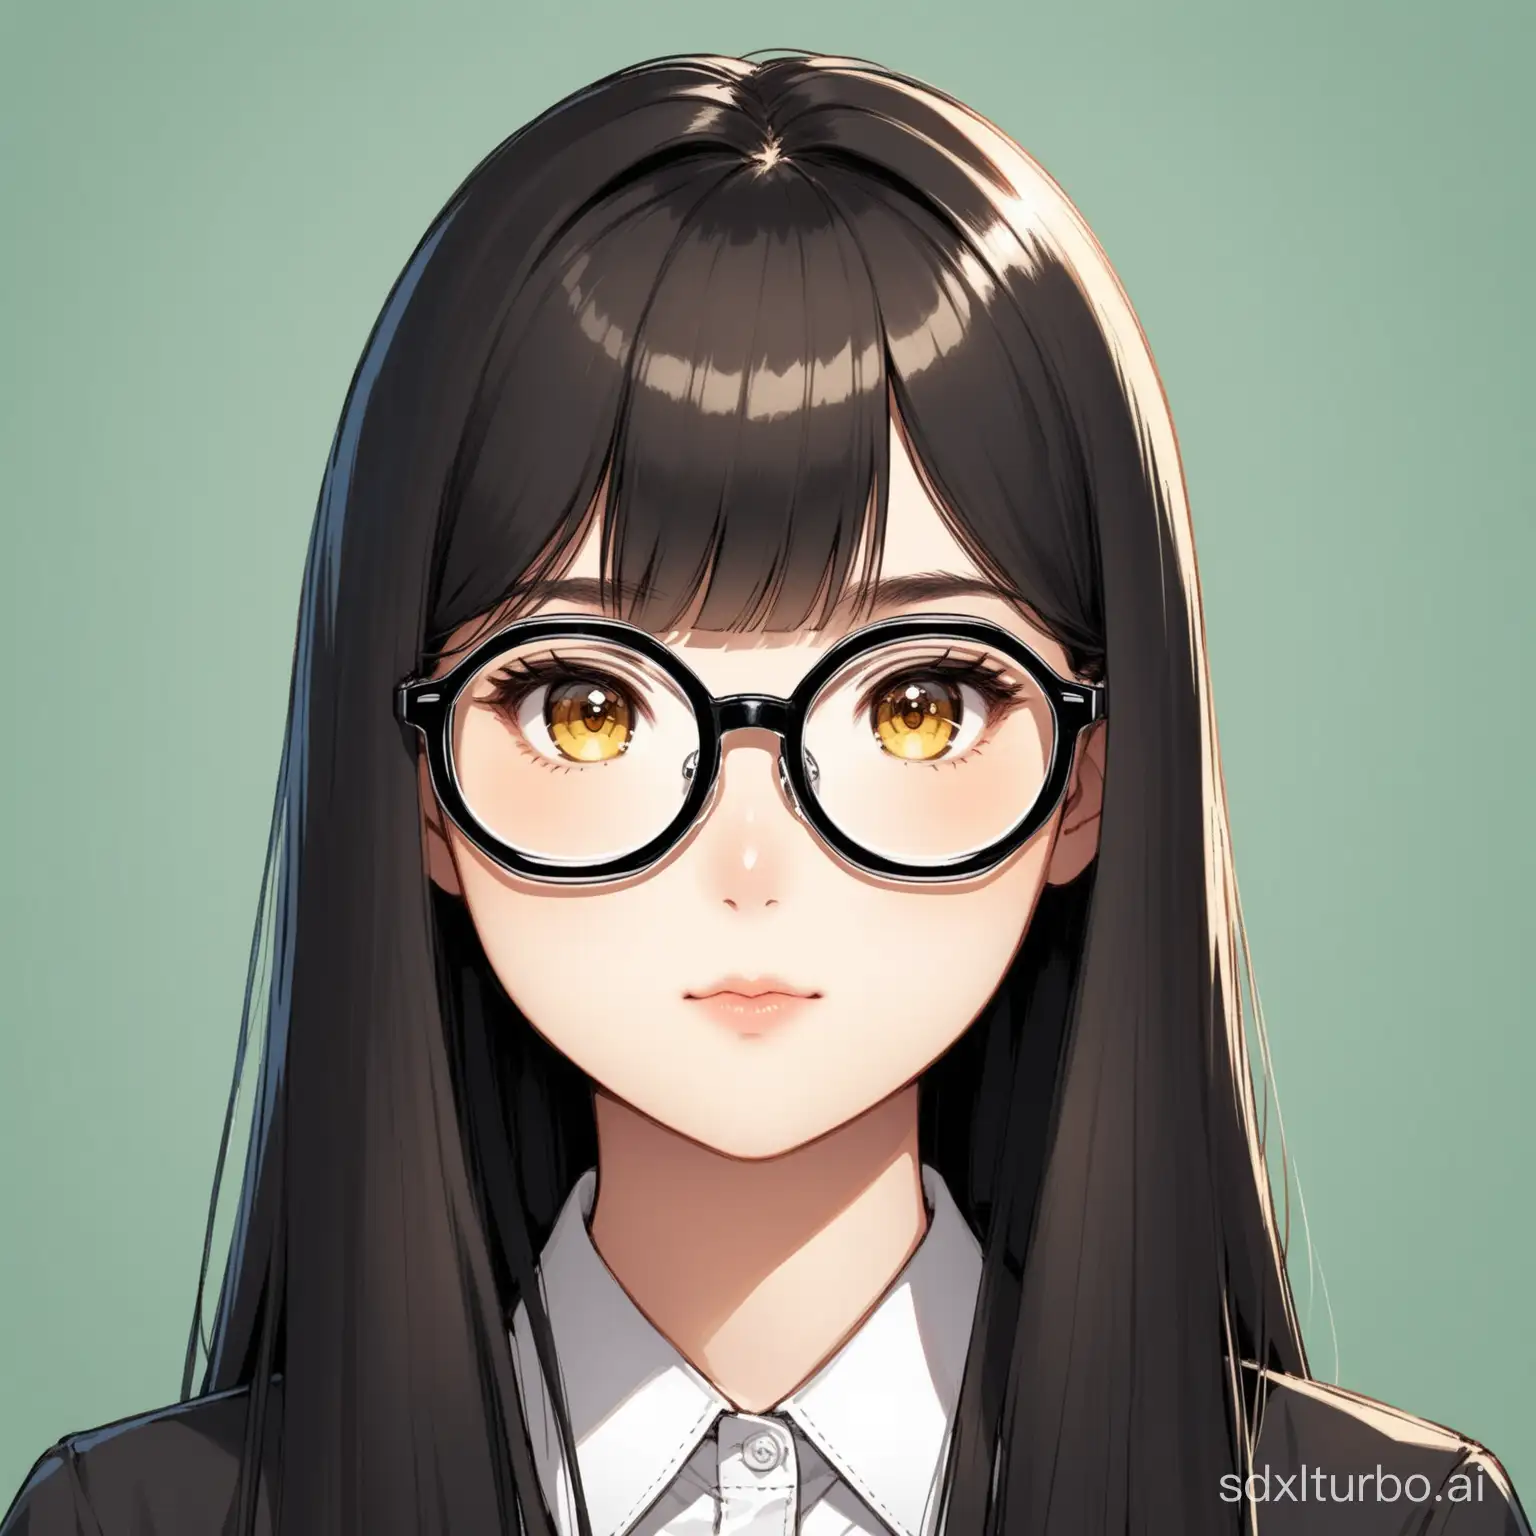 Professional-Work-ID-Photo-with-Bangs-and-Thick-Black-Frame-Glasses